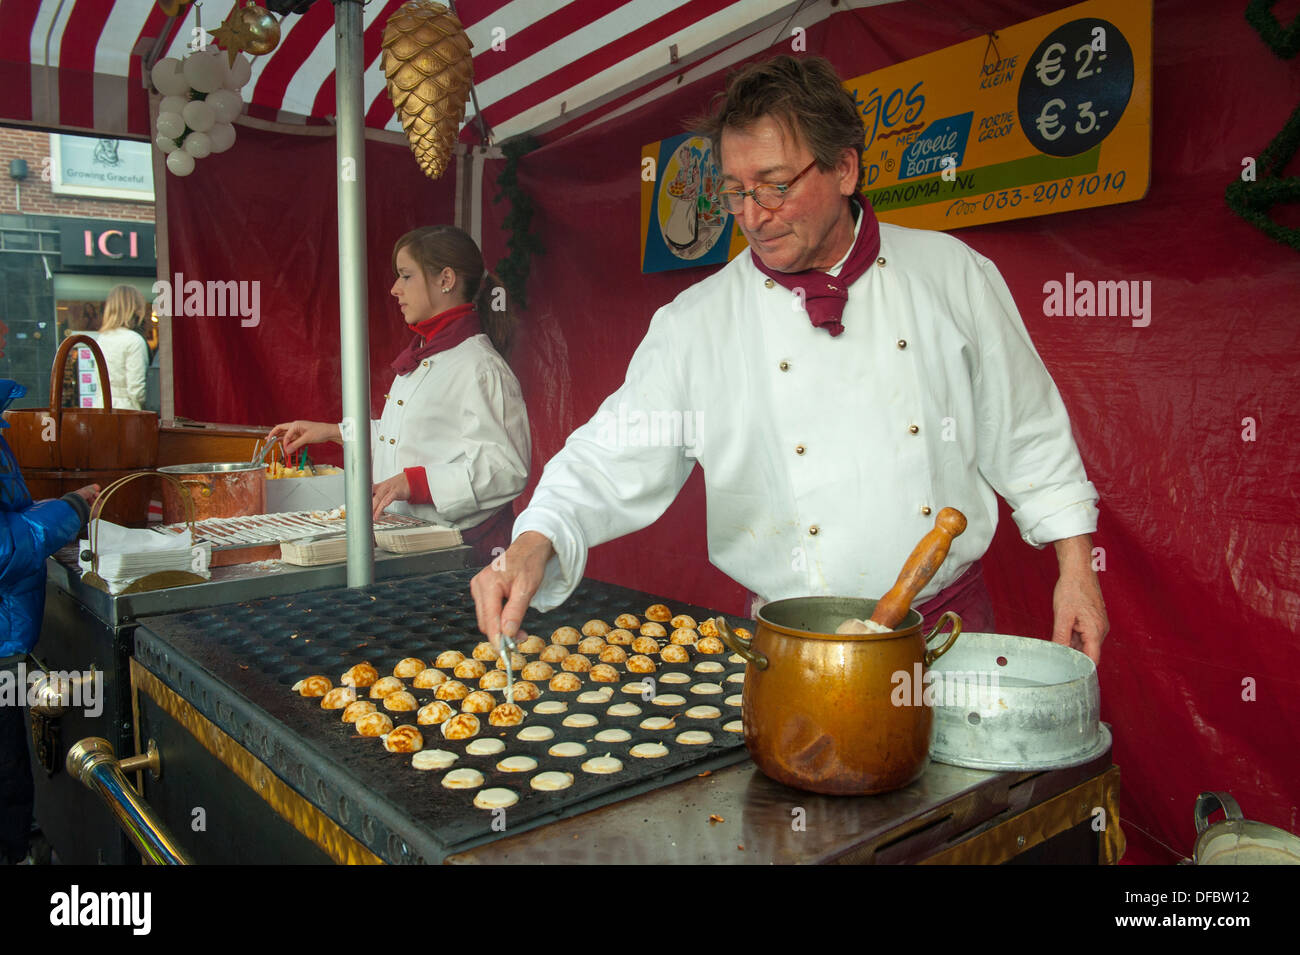 Man bakes Poffertjes a Dutch pastry in a market stall in Amersfoort, Netherlands Stock Photo